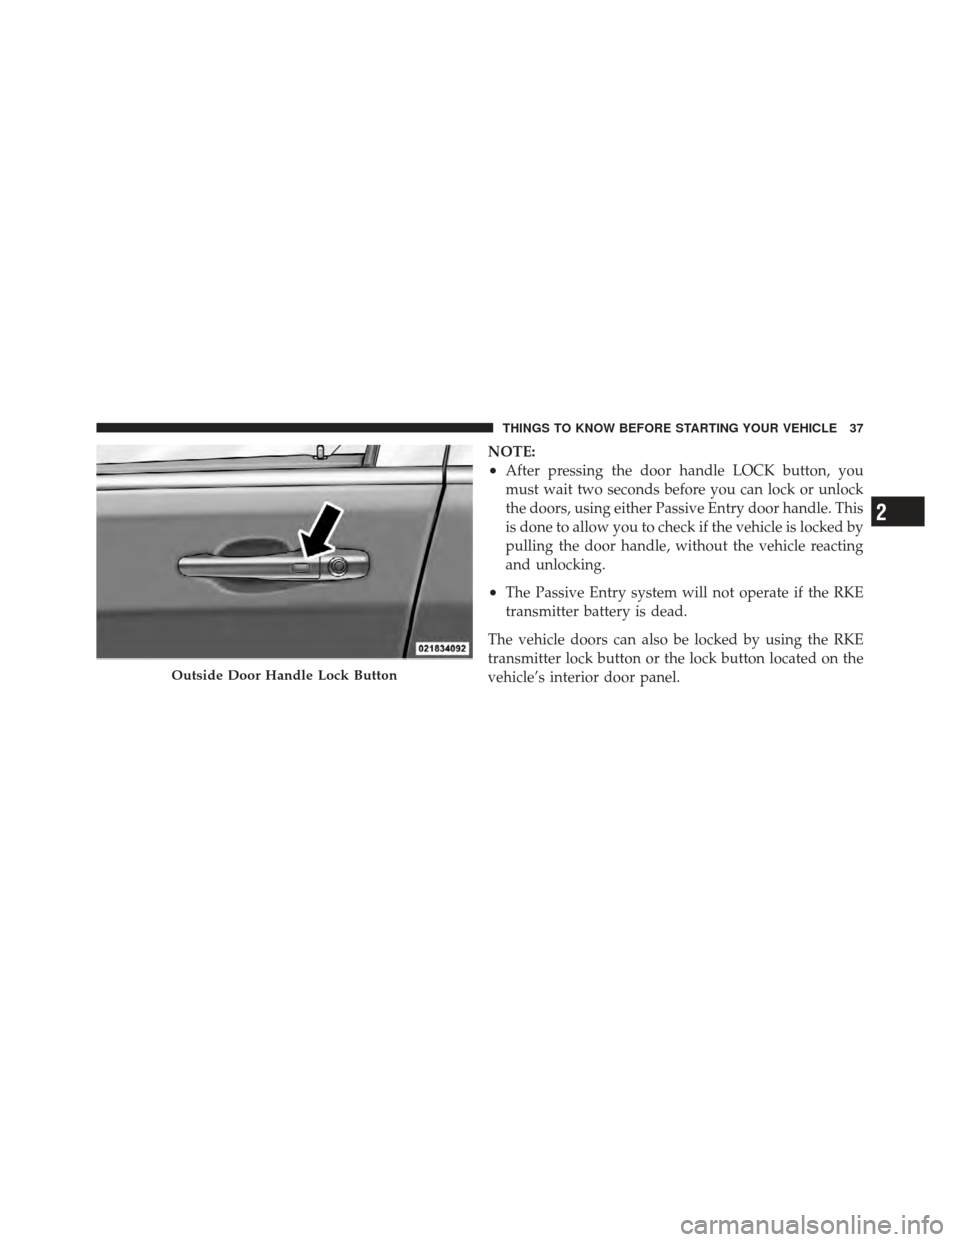 CHRYSLER 300 2011 2.G Owners Guide NOTE:
•After pressing the door handle LOCK button, you
must wait two seconds before you can lock or unlock
the doors, using either Passive Entry door handle. This
is done to allow you to check if th